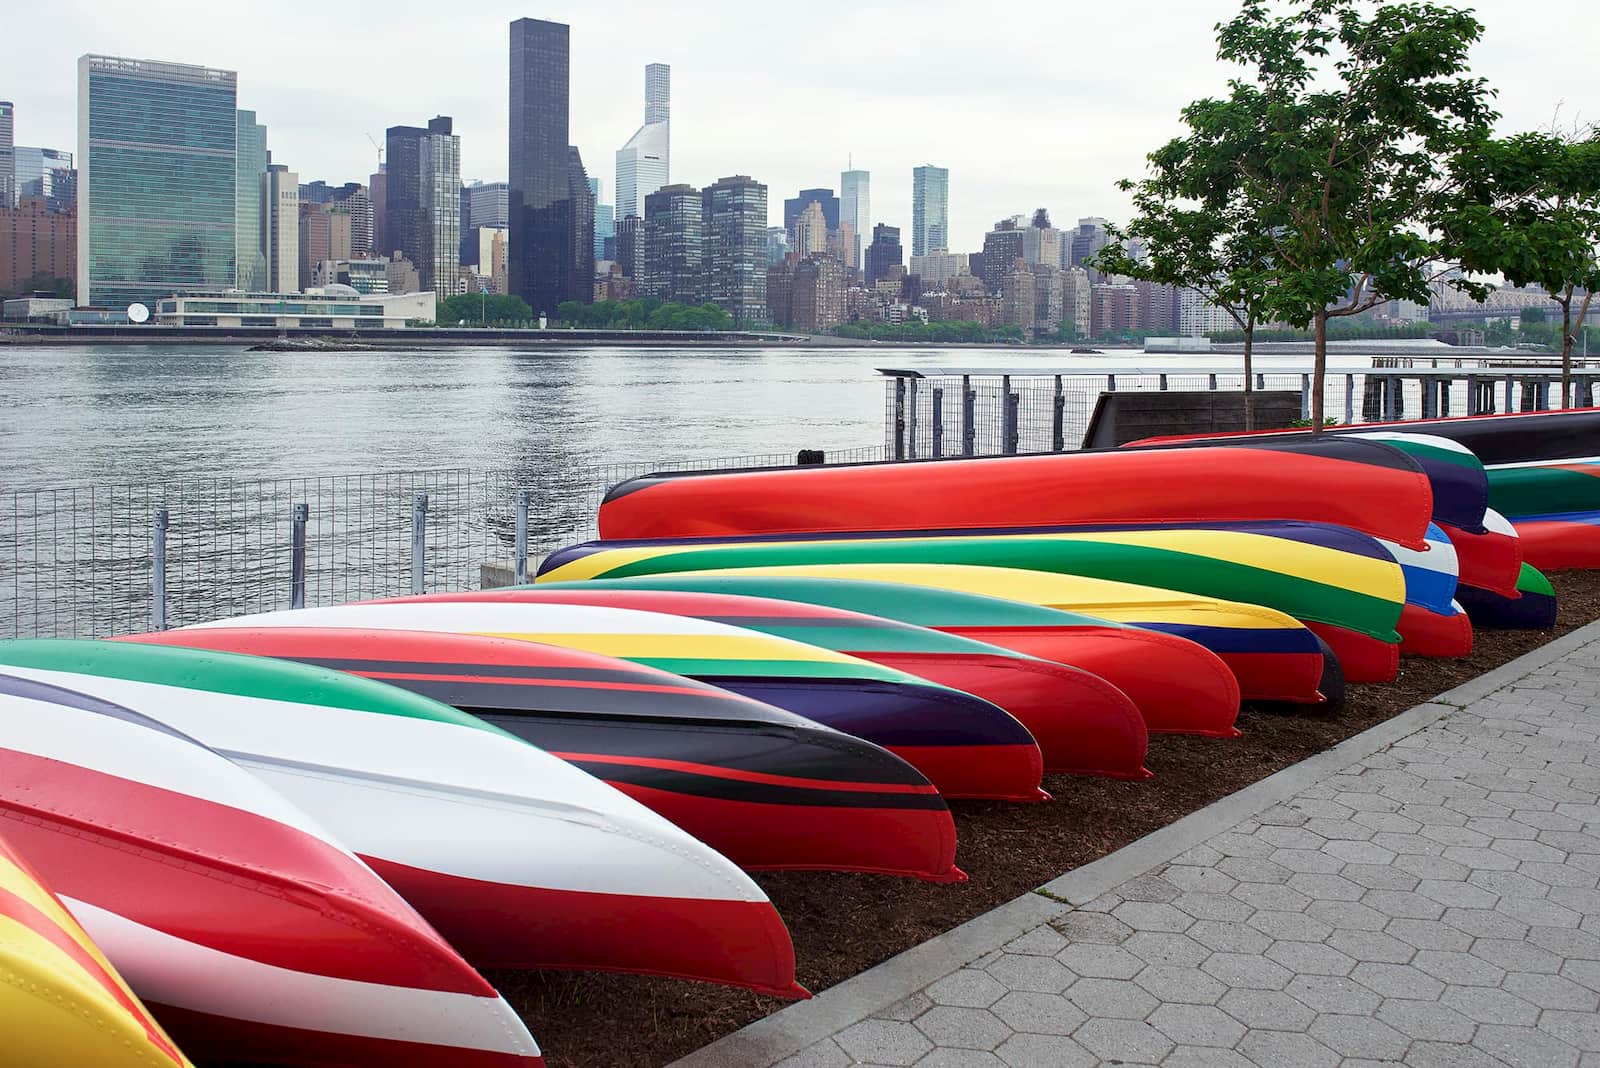 Photo of 'Convene' by Xaviera Simmons -- colorfully painted canoes lying along the East River in NYC